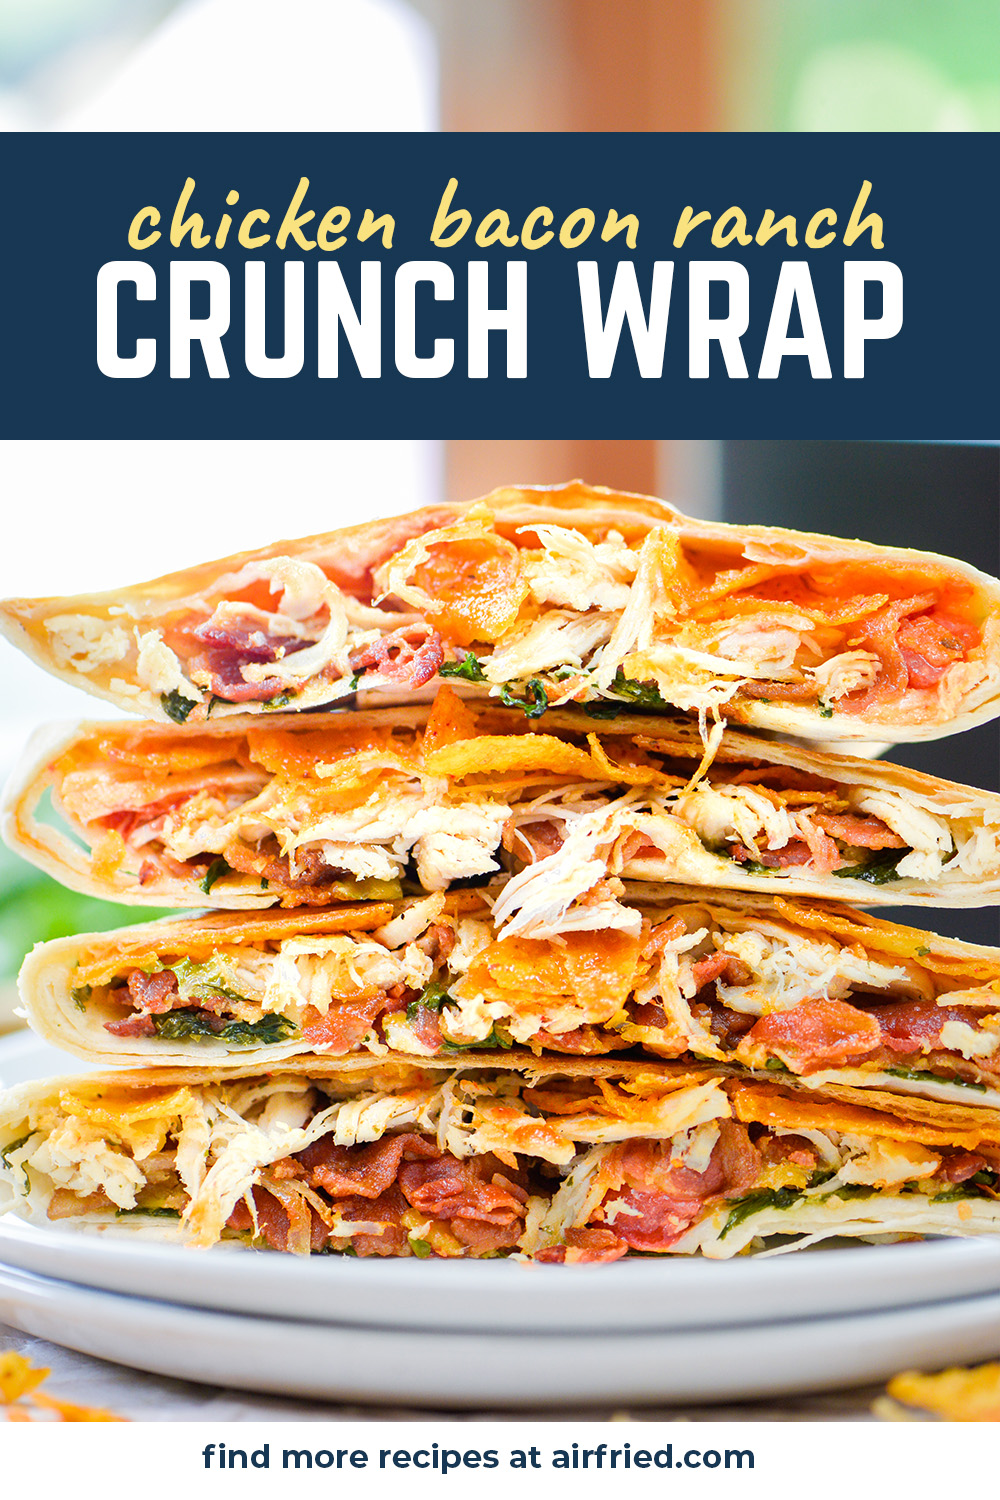 This homemade chicken bacon Ranch crunch wrap is made in the air fryer.  It is really easy, and full of wonderful texture and flavor!